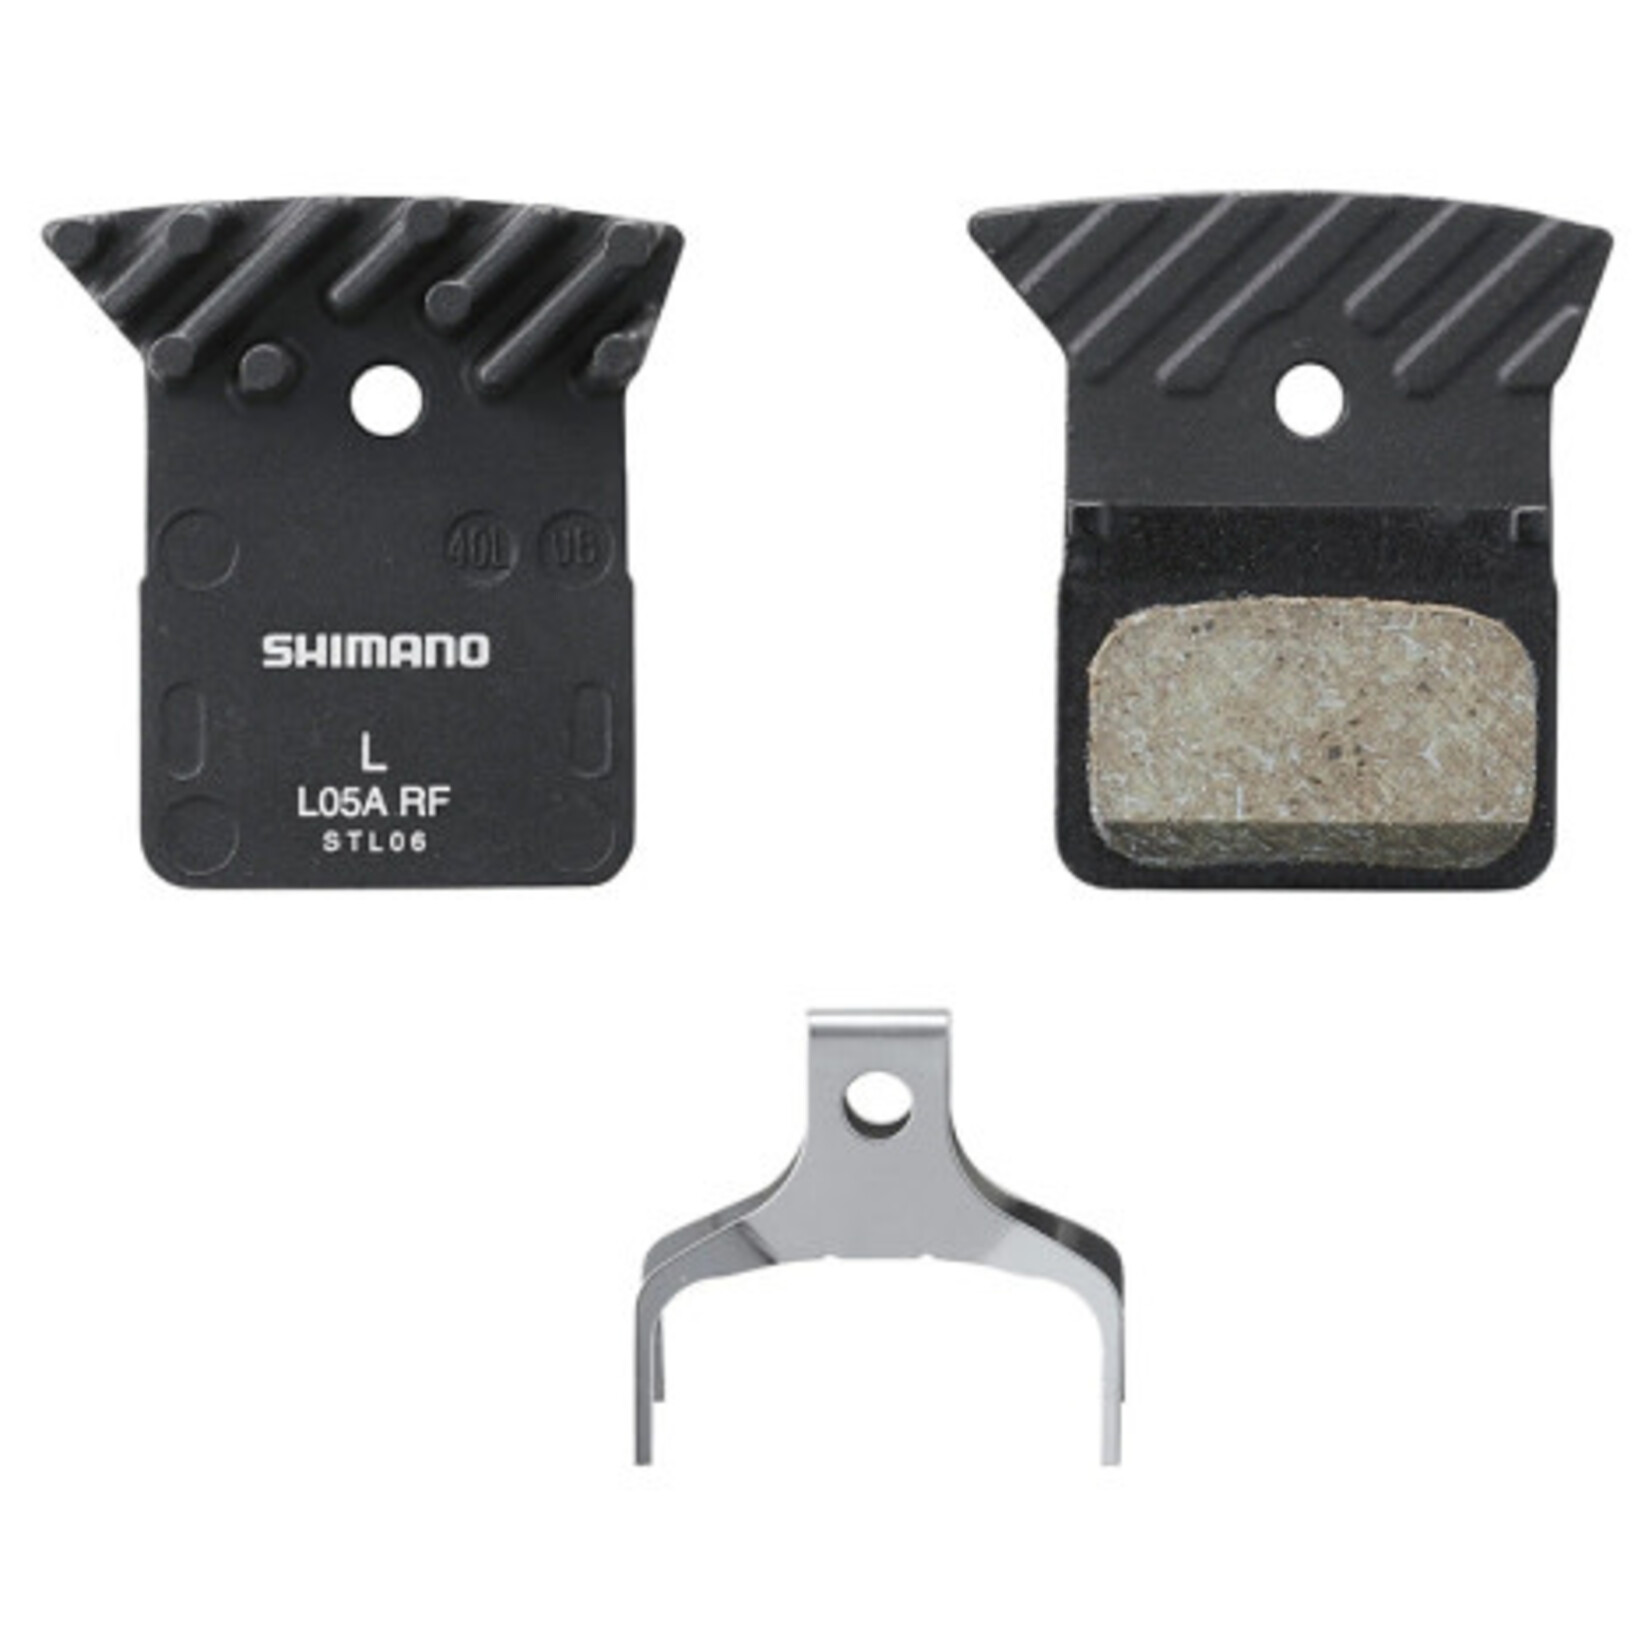 Shimano Spares Shimano L05A-RF disc pads and spring, alloy backed with cooling fins, resin